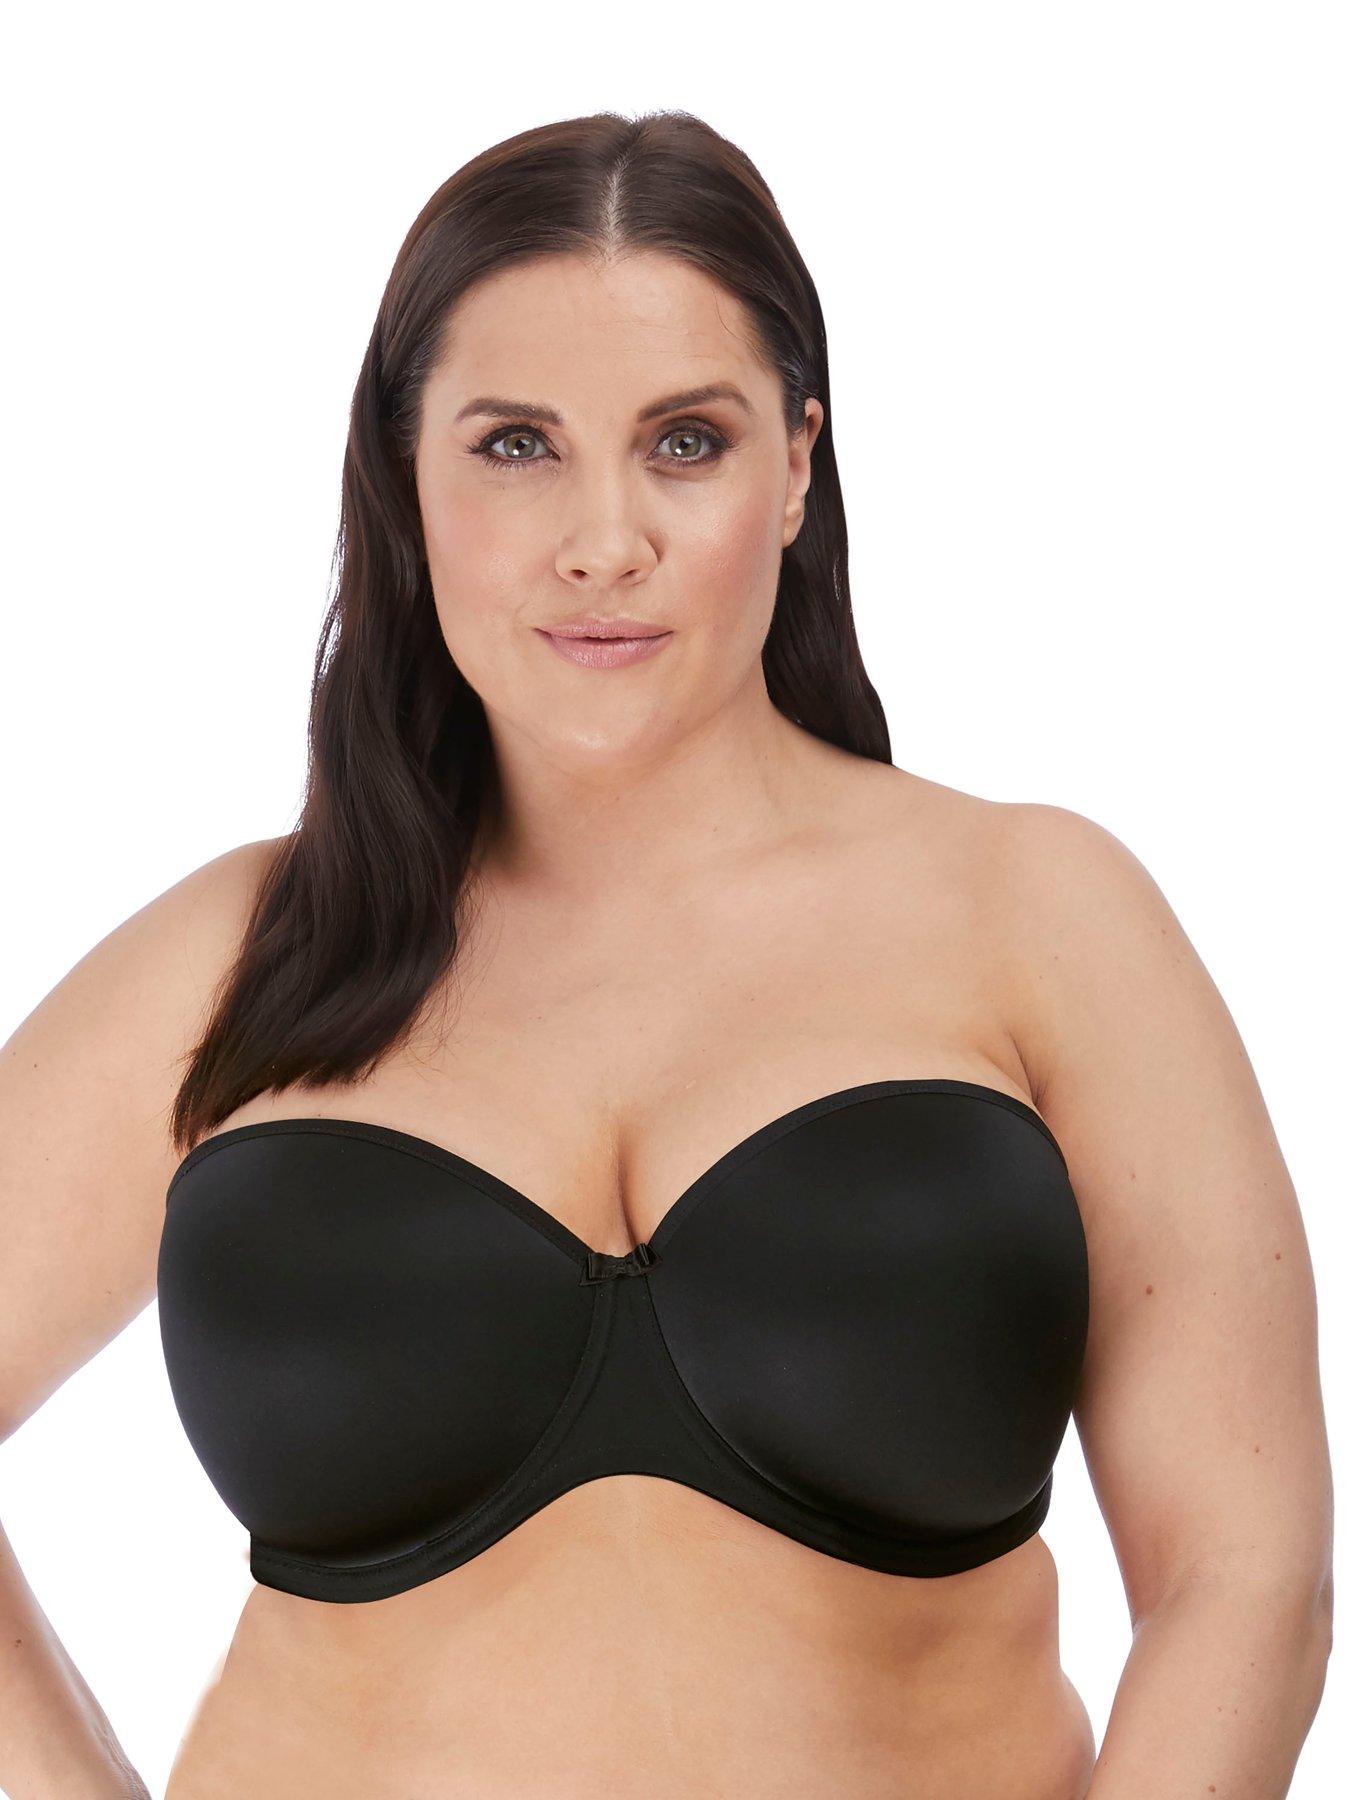 CURVY COUTURE Bombshell Nude Multi-Way Strapless Bra, US 38H, UK